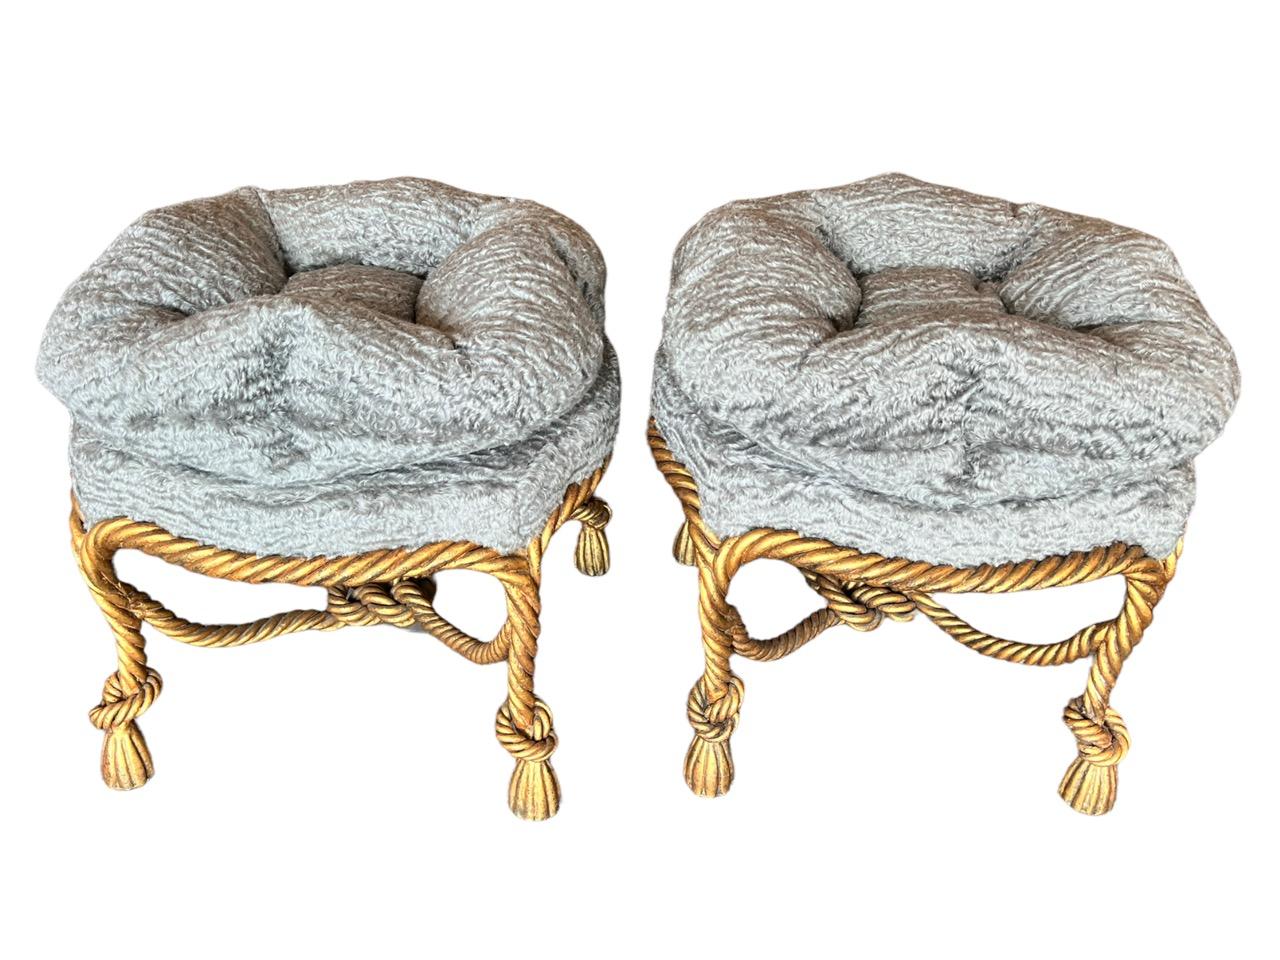 A pair of early 20th century Italian gilt gold metal rope and tassel boudoir stools with an upholstered tufted round pillow seat in Holly Hunt grey mohair fabric called Mammoth.
 